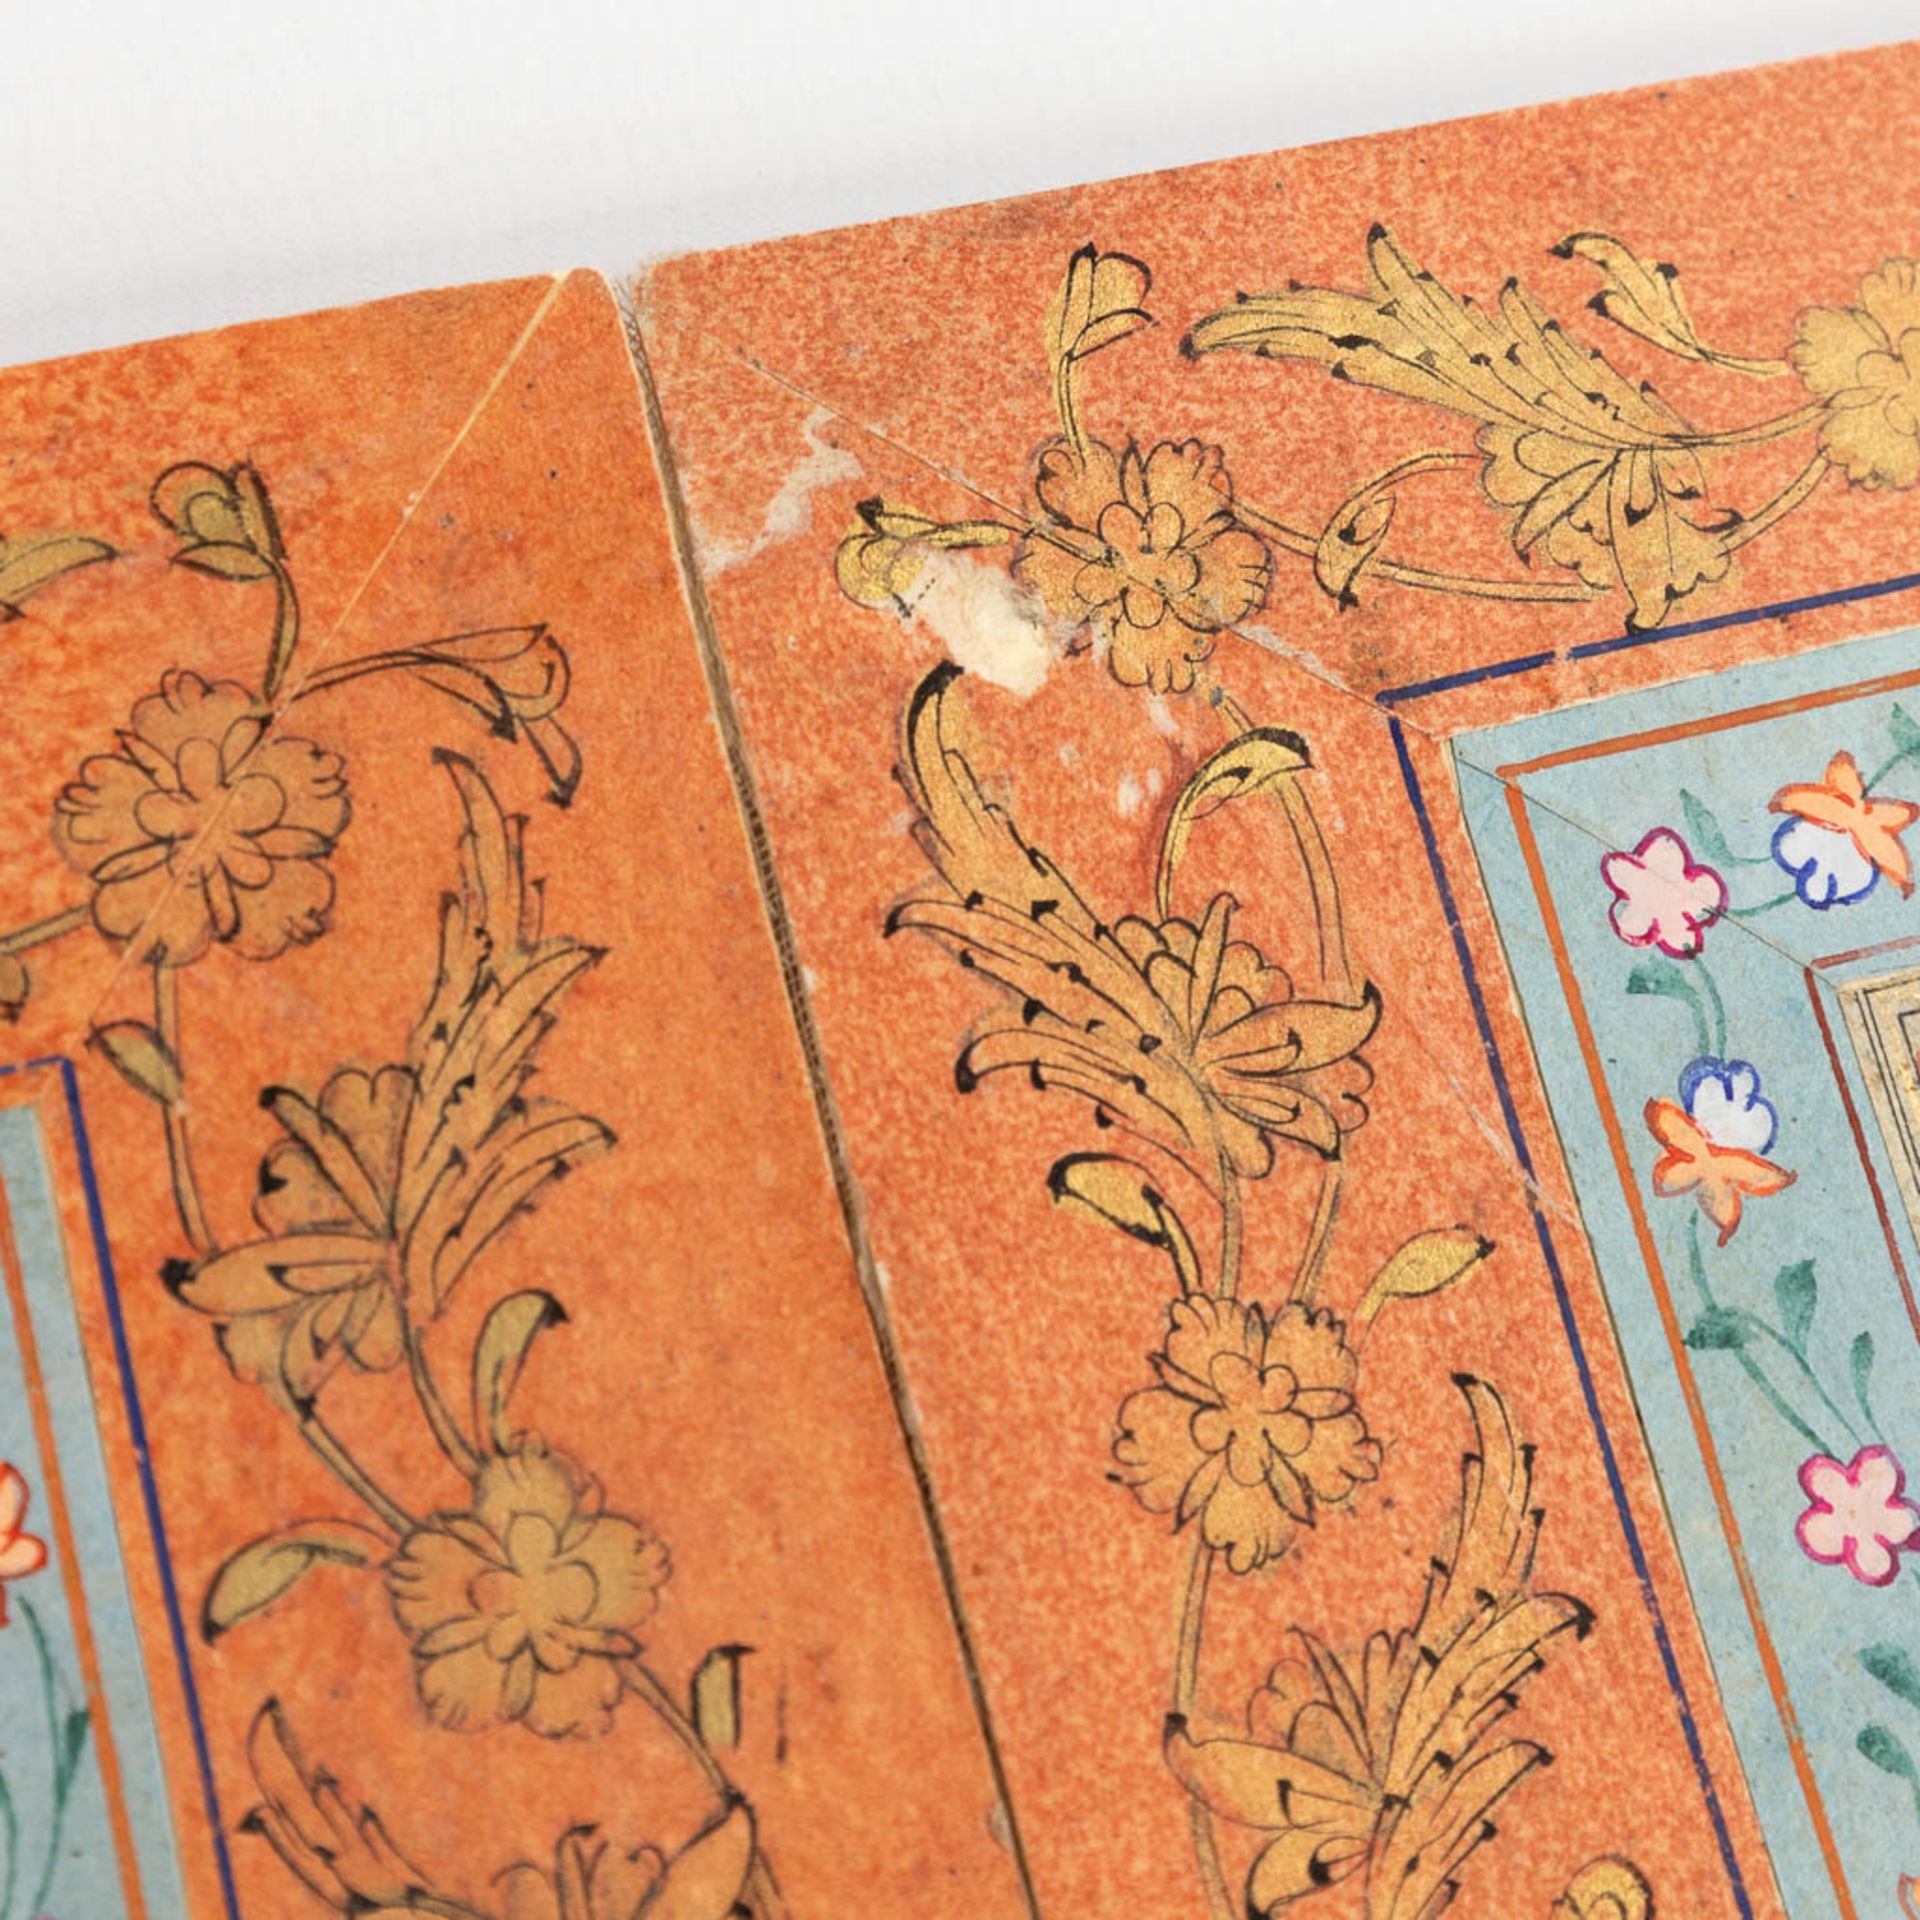 An album of Ottoman Calligraphic Panels (QITA) early 20th C. (W:15 x H:20 cm) - Image 8 of 12